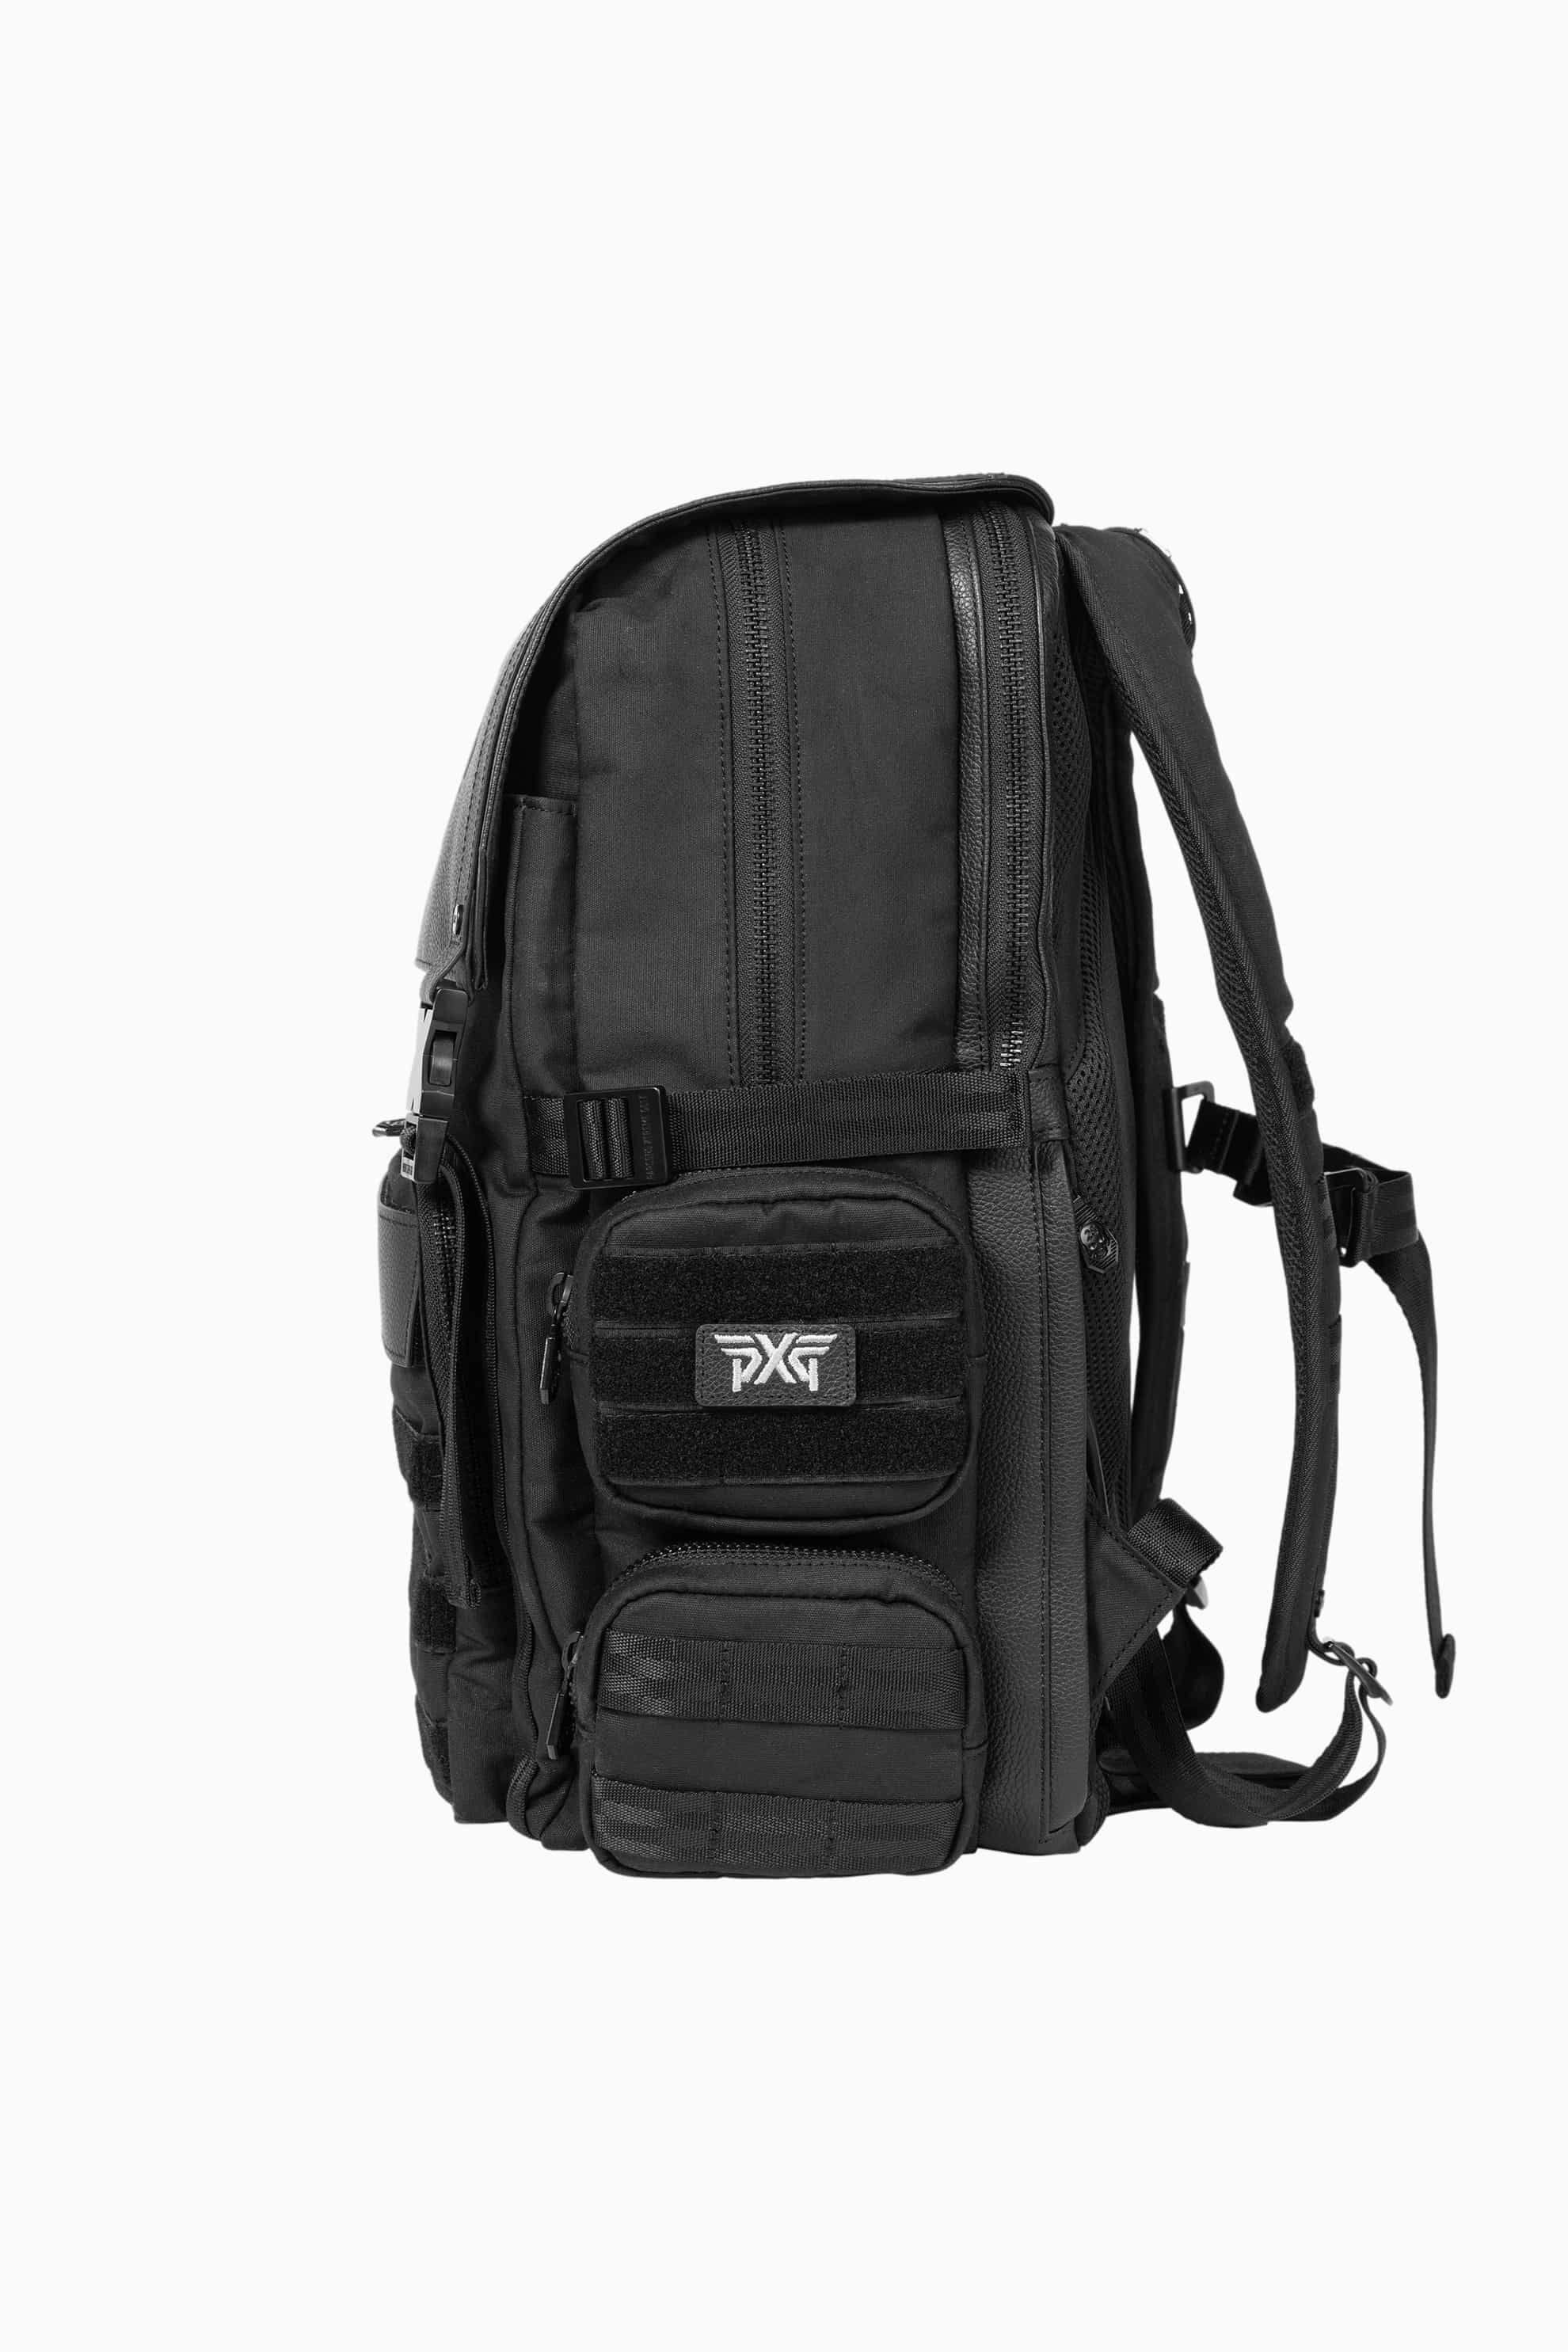 Buy PXG Darkness Troops Backpack | PXG